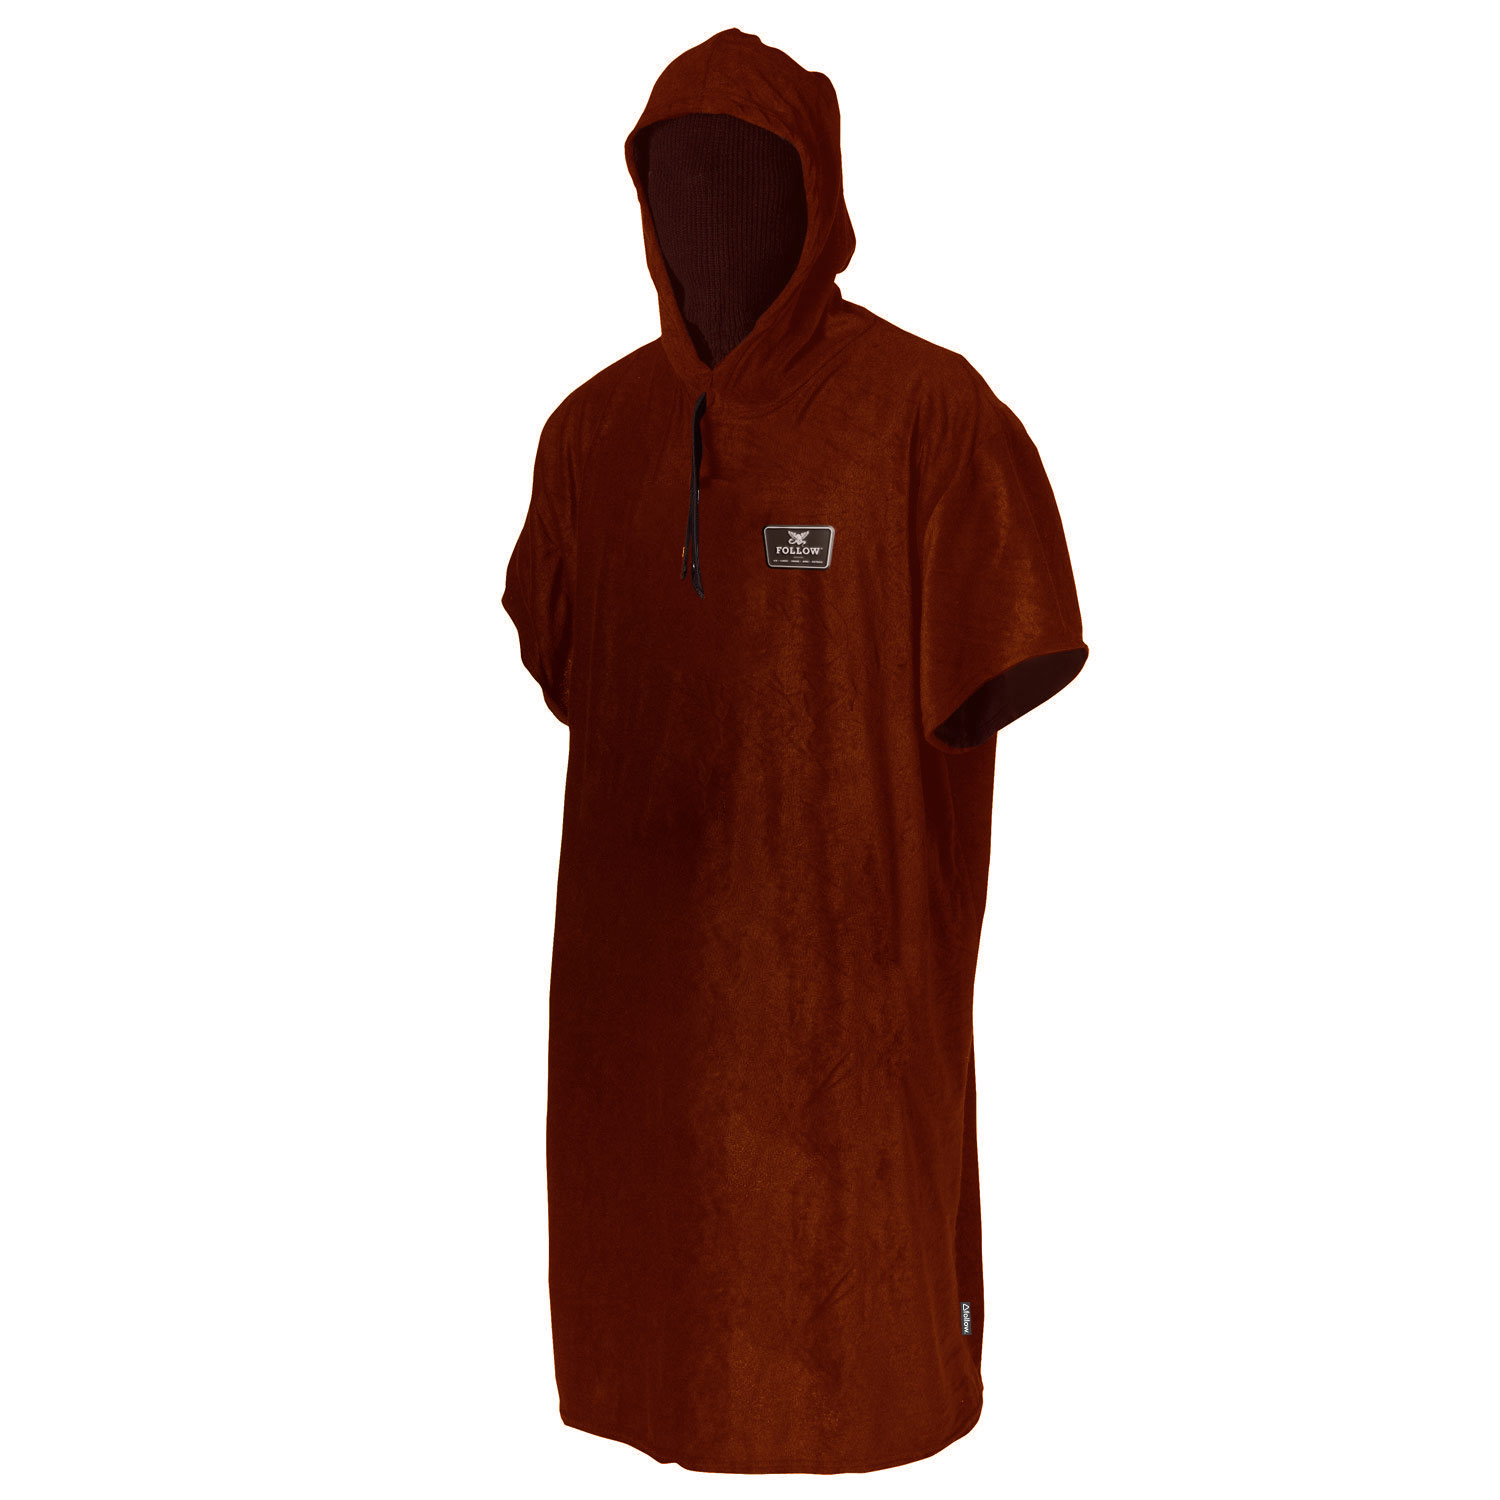   HOODED TOWELIE PONCHO - RED FOLLOW 2019